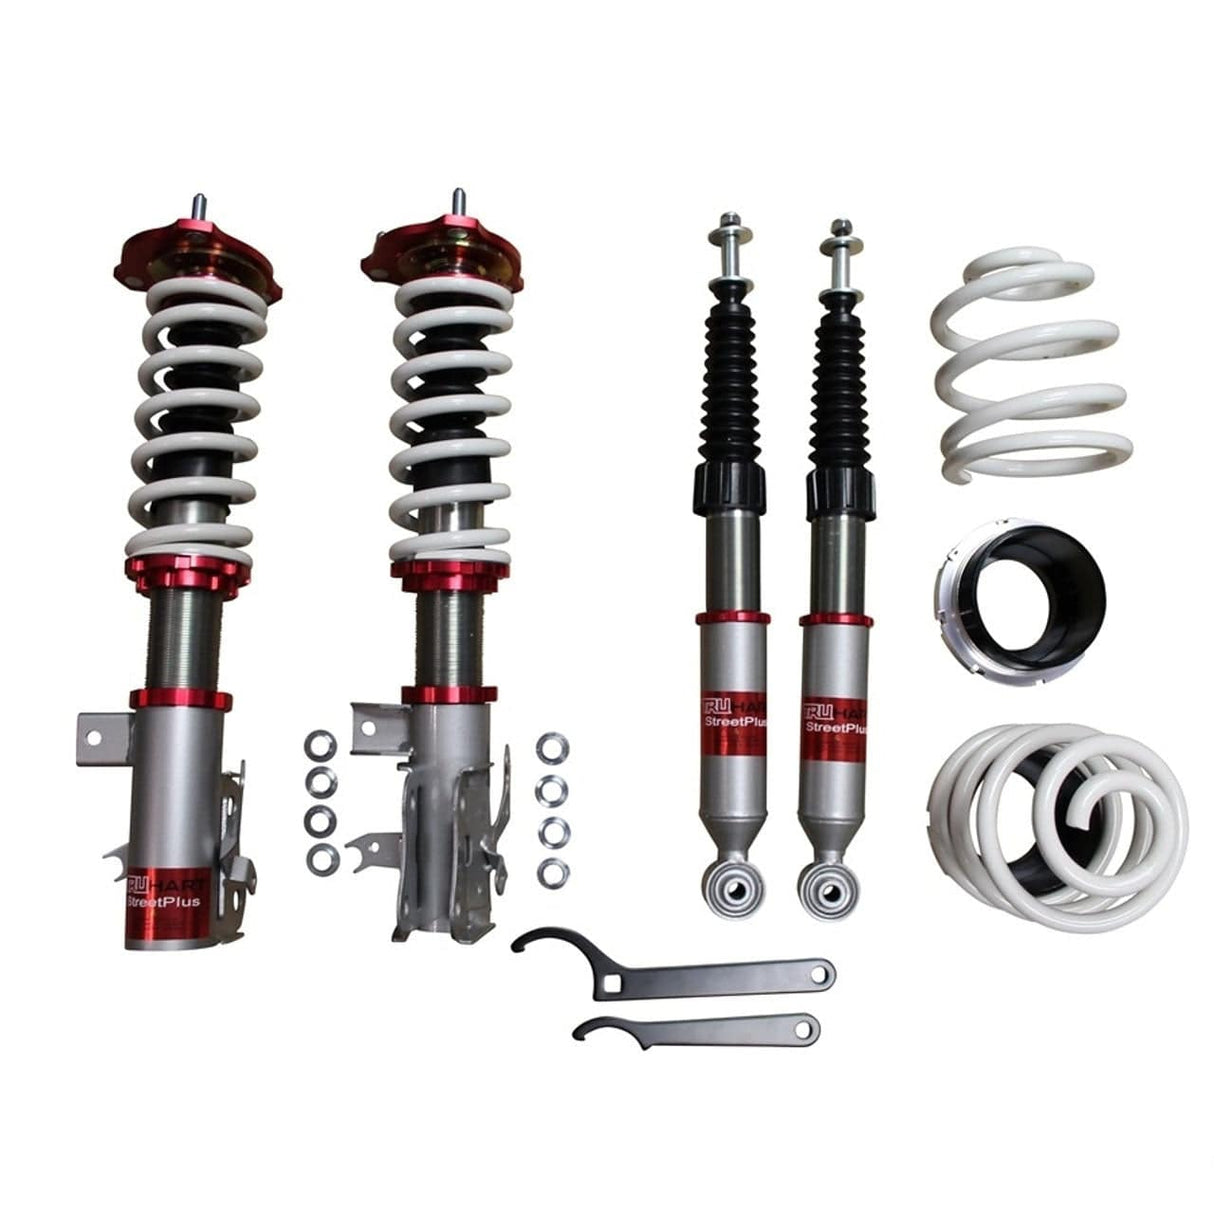 TruHart StreetPlus Coilovers for 2012-2015 Honda Civic